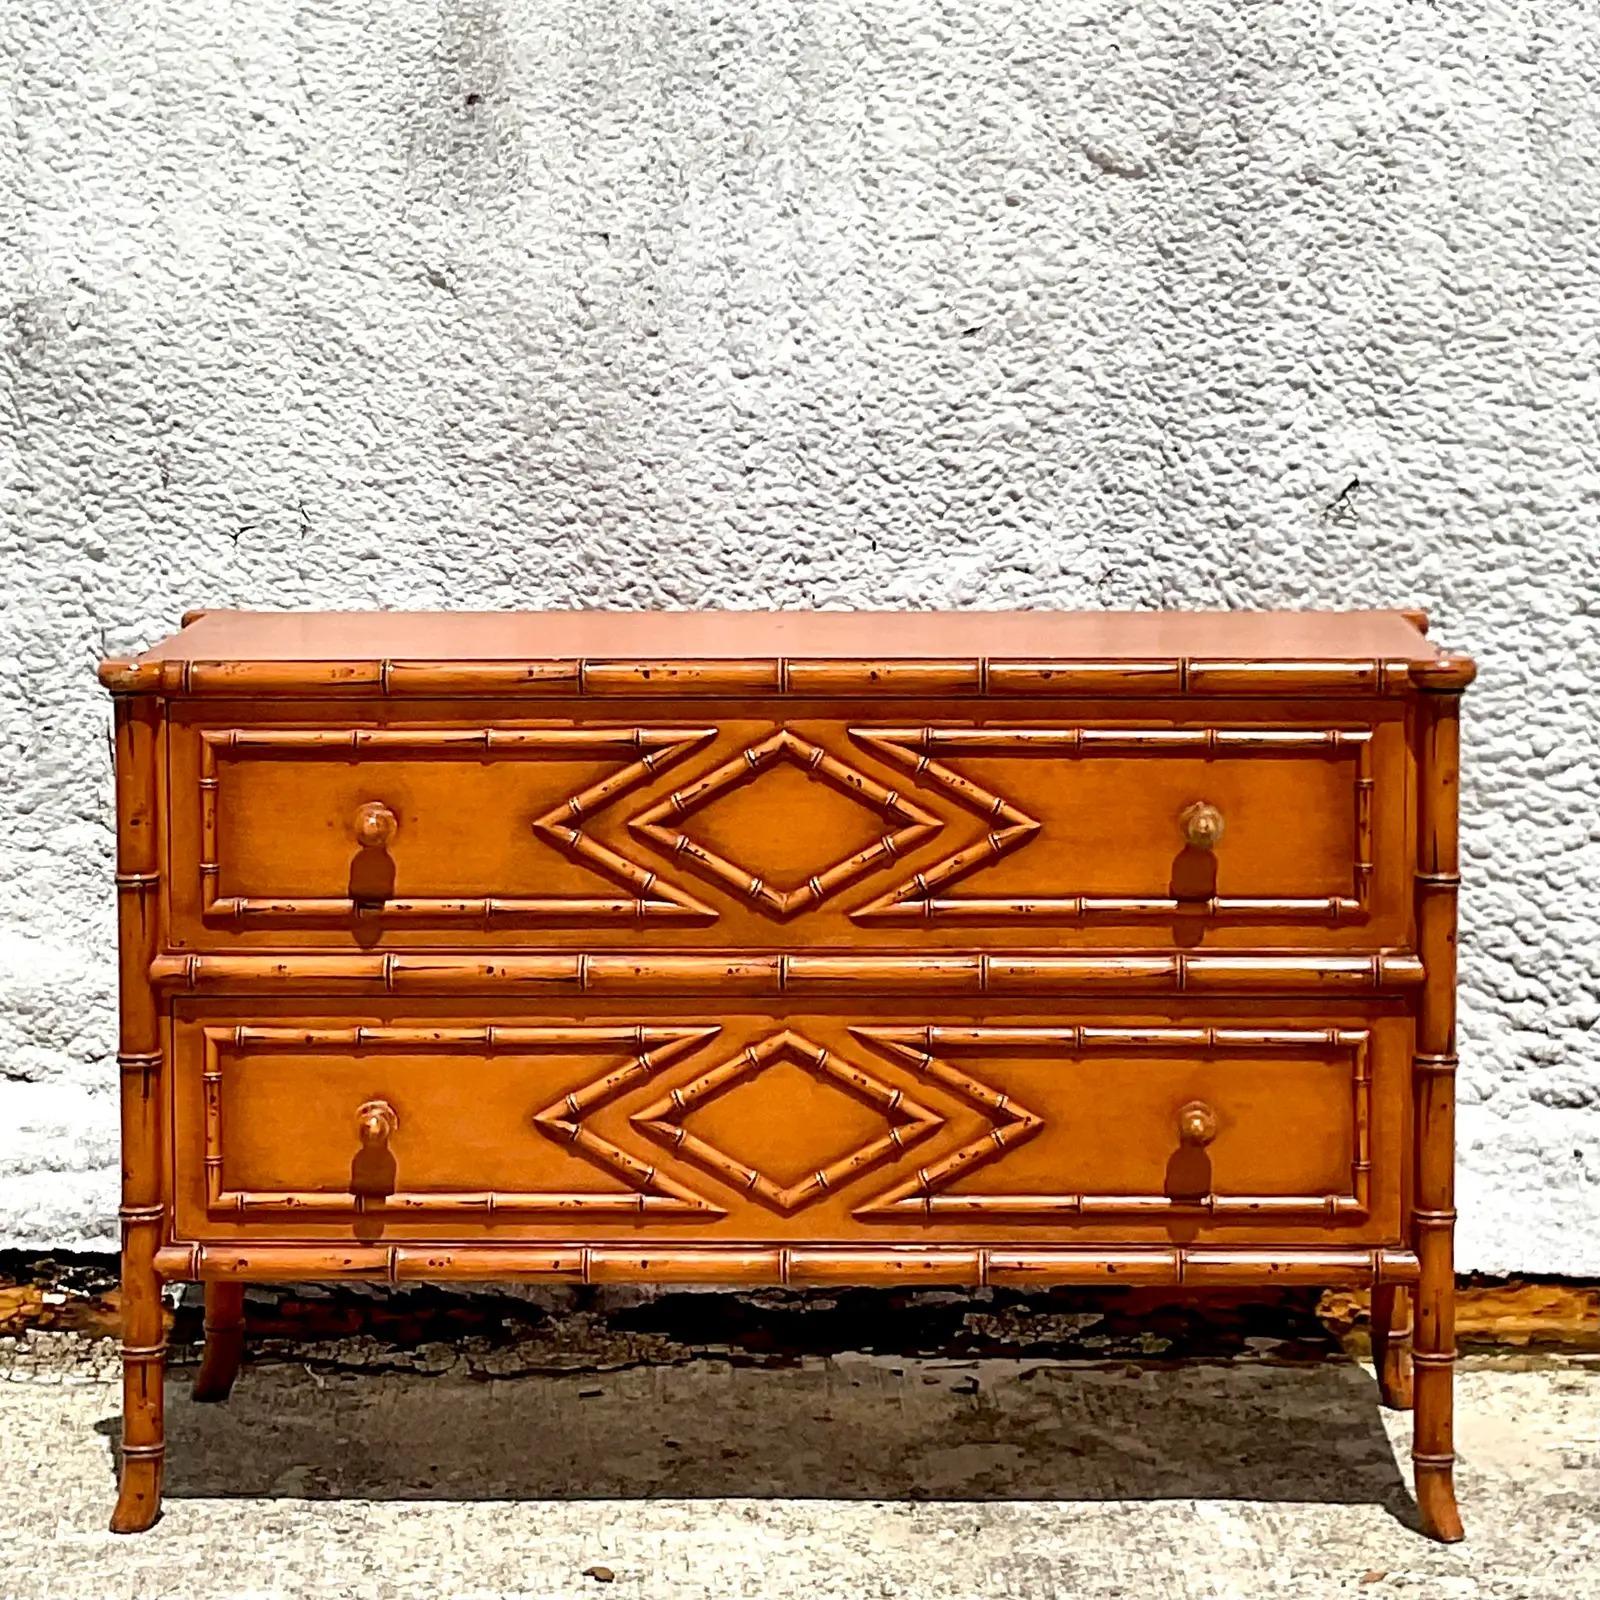 Fantastic vintage Coastal chest of drawers. Beautiful carved bamboo detail on a lower profile shape. Gorgeous warm brown finish. Acquired from a Palm Beach estate.